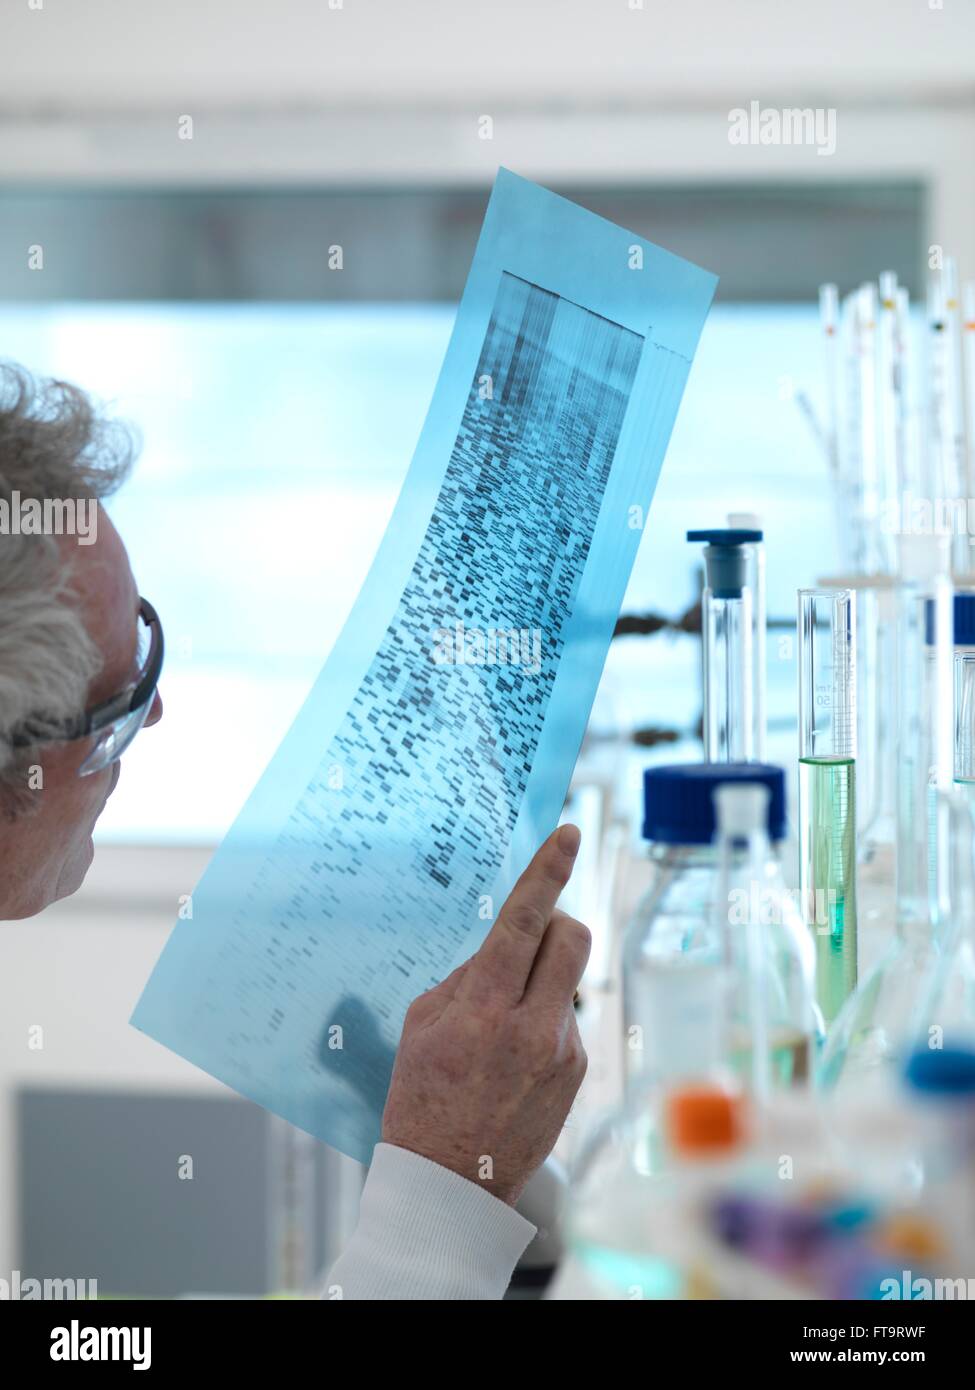 PROPERTY RELEASED MODEL RELEASED Researcher holding a DNA (deoxyribonucleic acid) gel during a genetic experiment in a Stock Photo